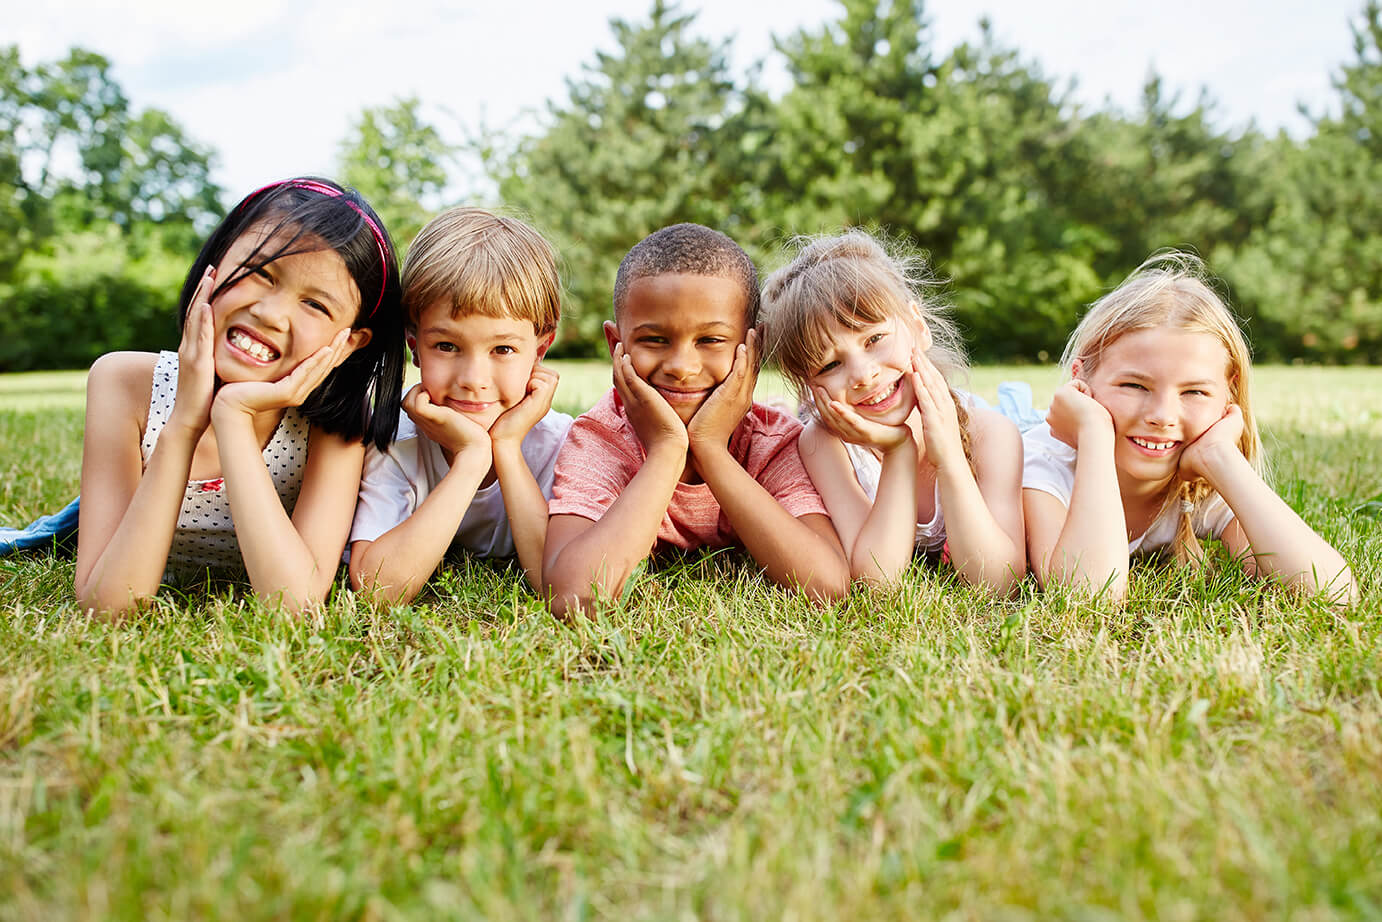 Children smiling on the grass